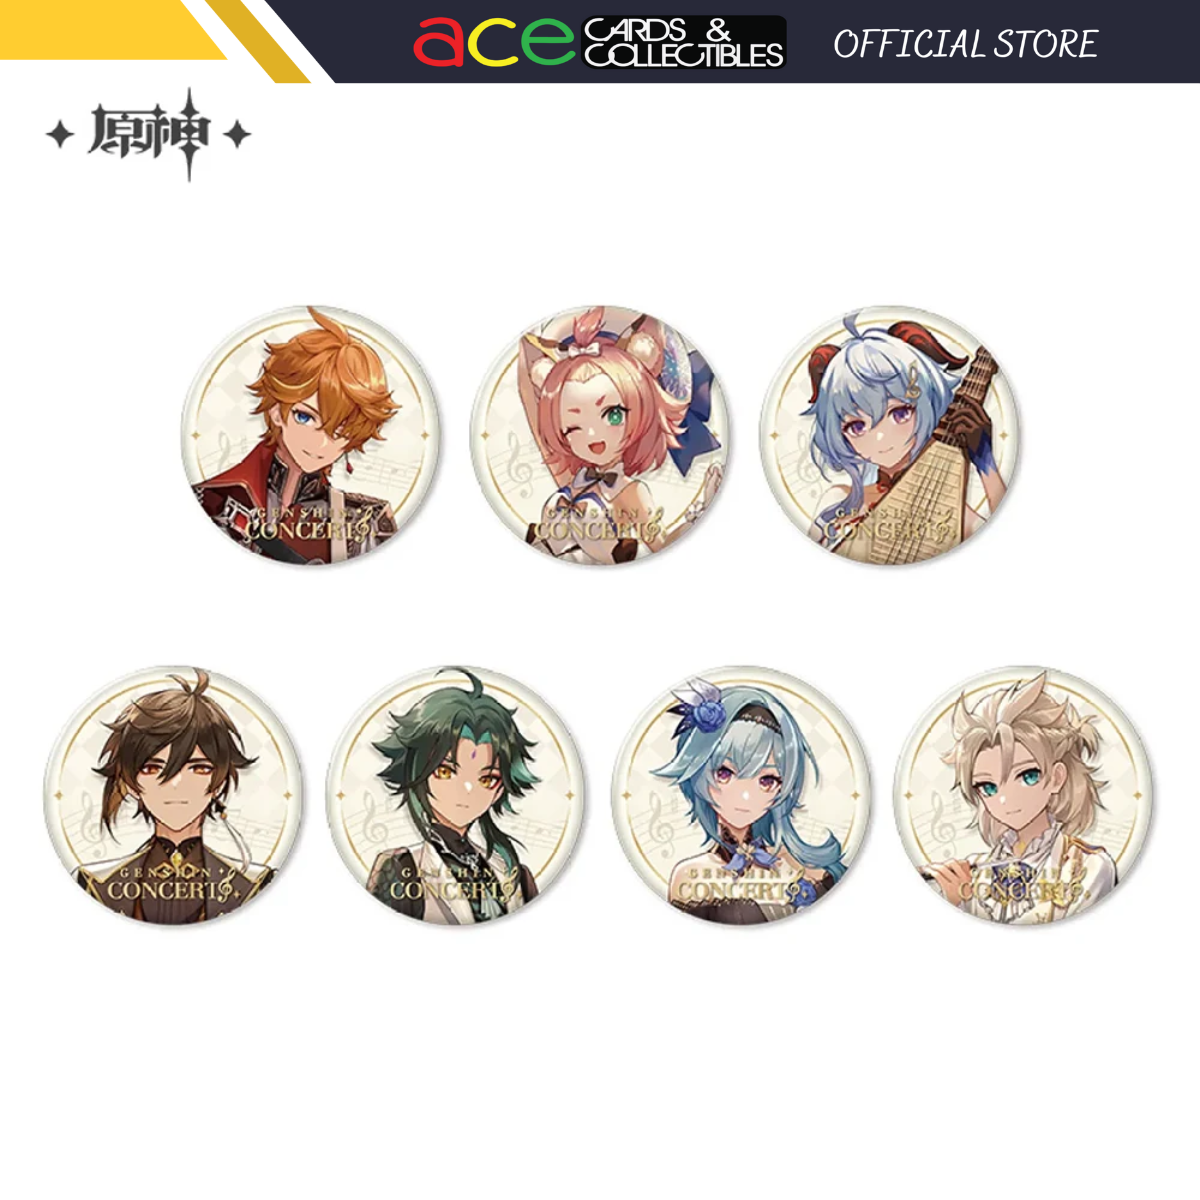 miHoYo Genshin Impact Concert 2023 Melodies of an Endless Journey Character Badge-Xiao-miHoYo-Ace Cards & Collectibles